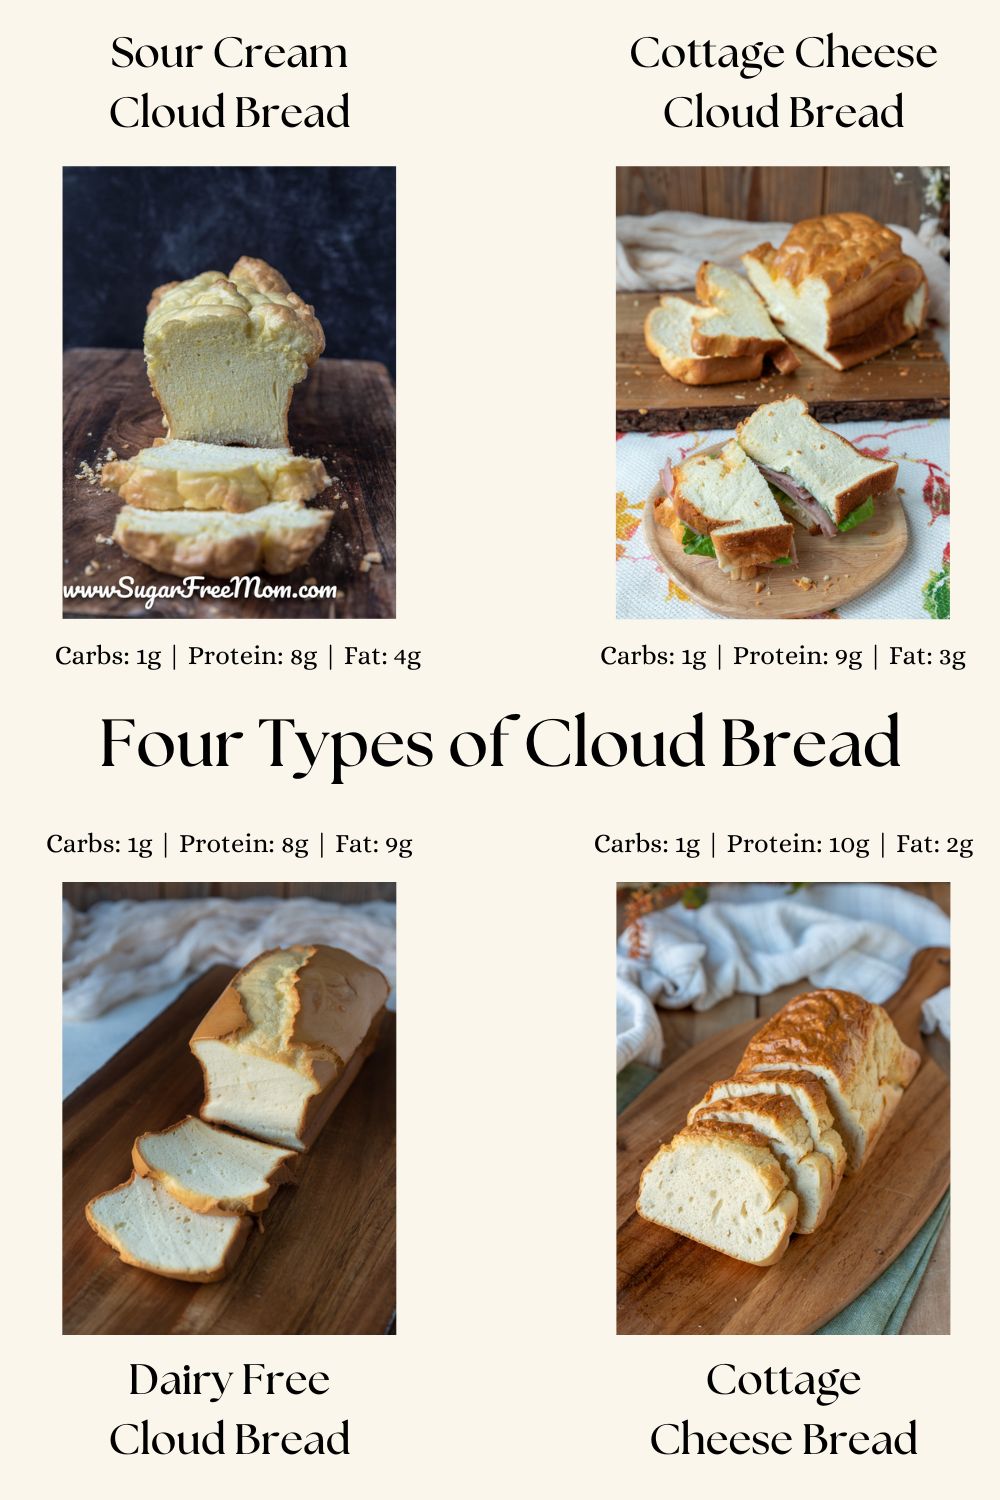 This is the best low carb cottage cheese cloud bread that has 9 grams of protein and just 1 gram carbohydrates per slice! The next time you want to make a keto bread, try this satisfying cottage cheese cloud bread! Be sure to read my blog post that shares the best uses of the 4 different types of keto cloud bread recipes!